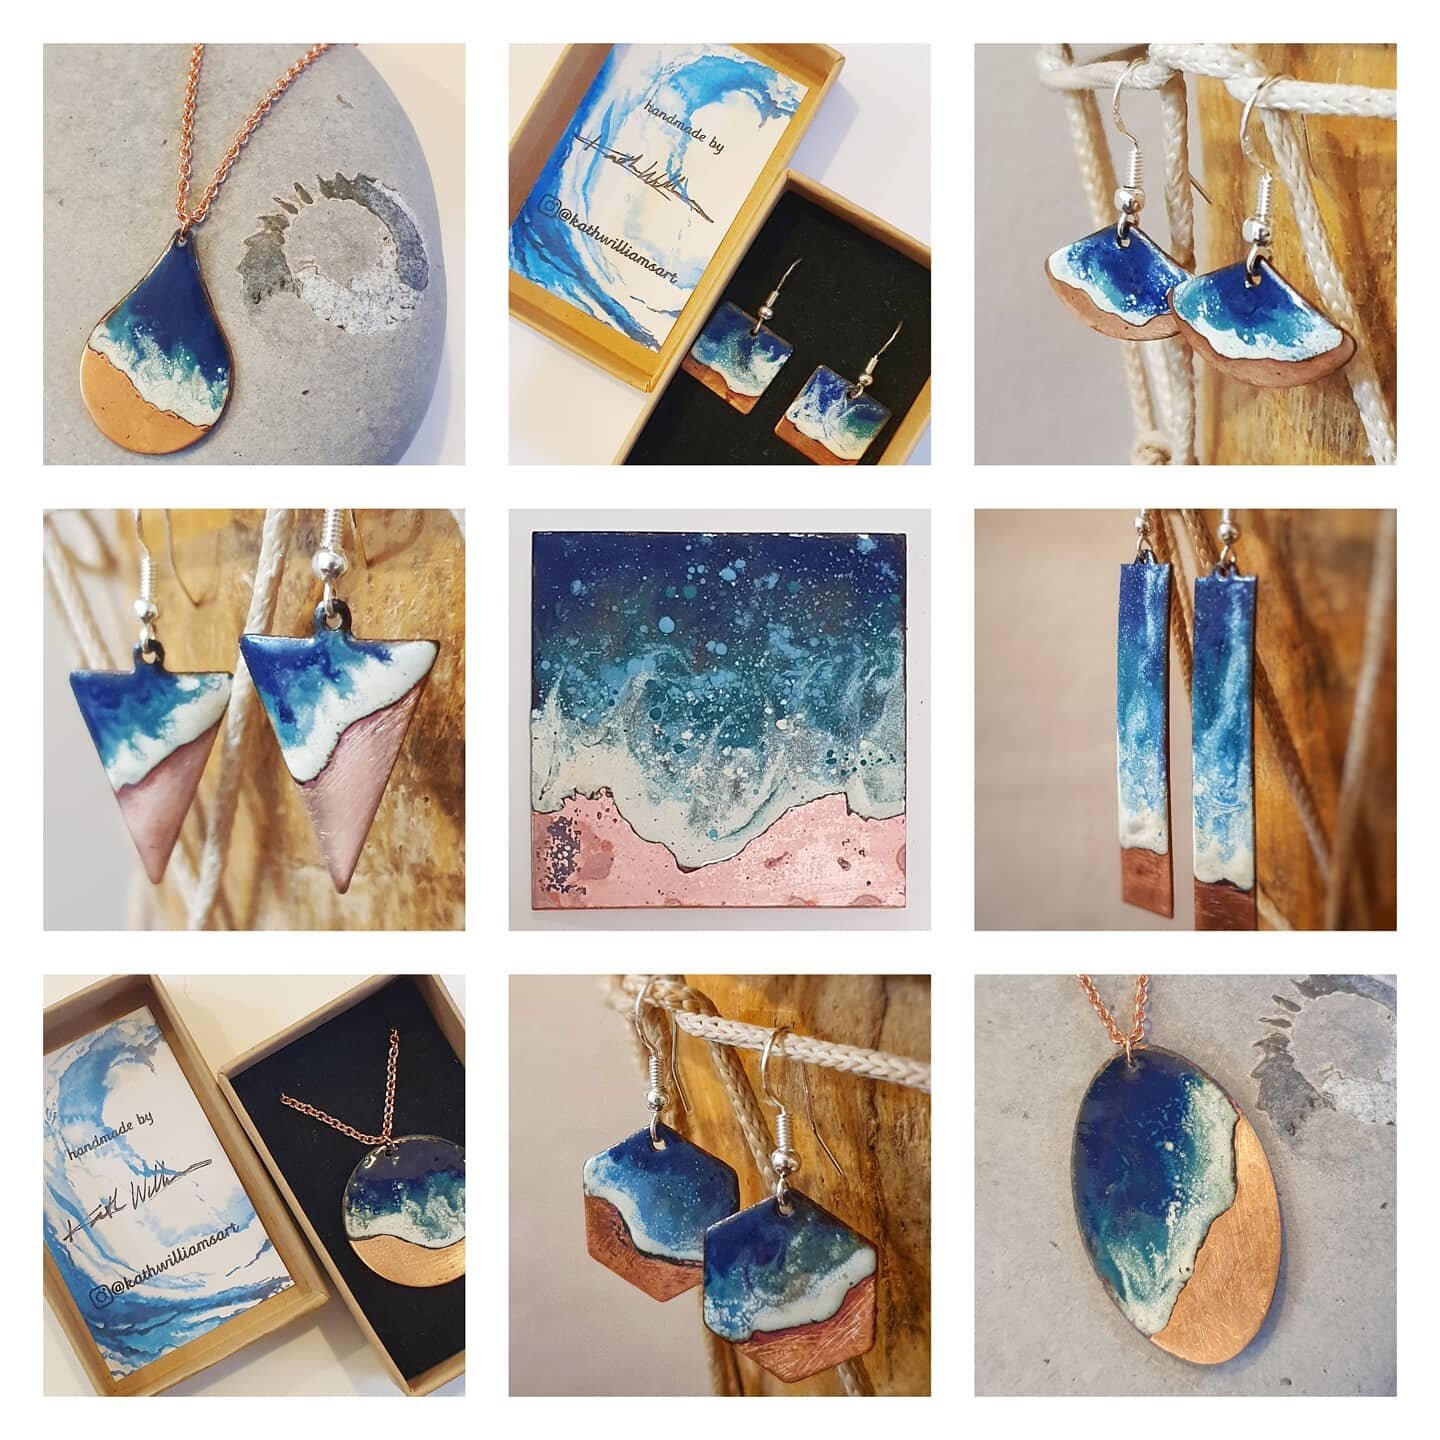 Excited to be exhibiting at #stroudoutdoorartfair this Saturday alongside lots of talented local artists. You will find us outside the Subrooms, enjoying the sunshine from 8am - 5pm. I will be selling enamel seascape pendants, earrings and artworks a